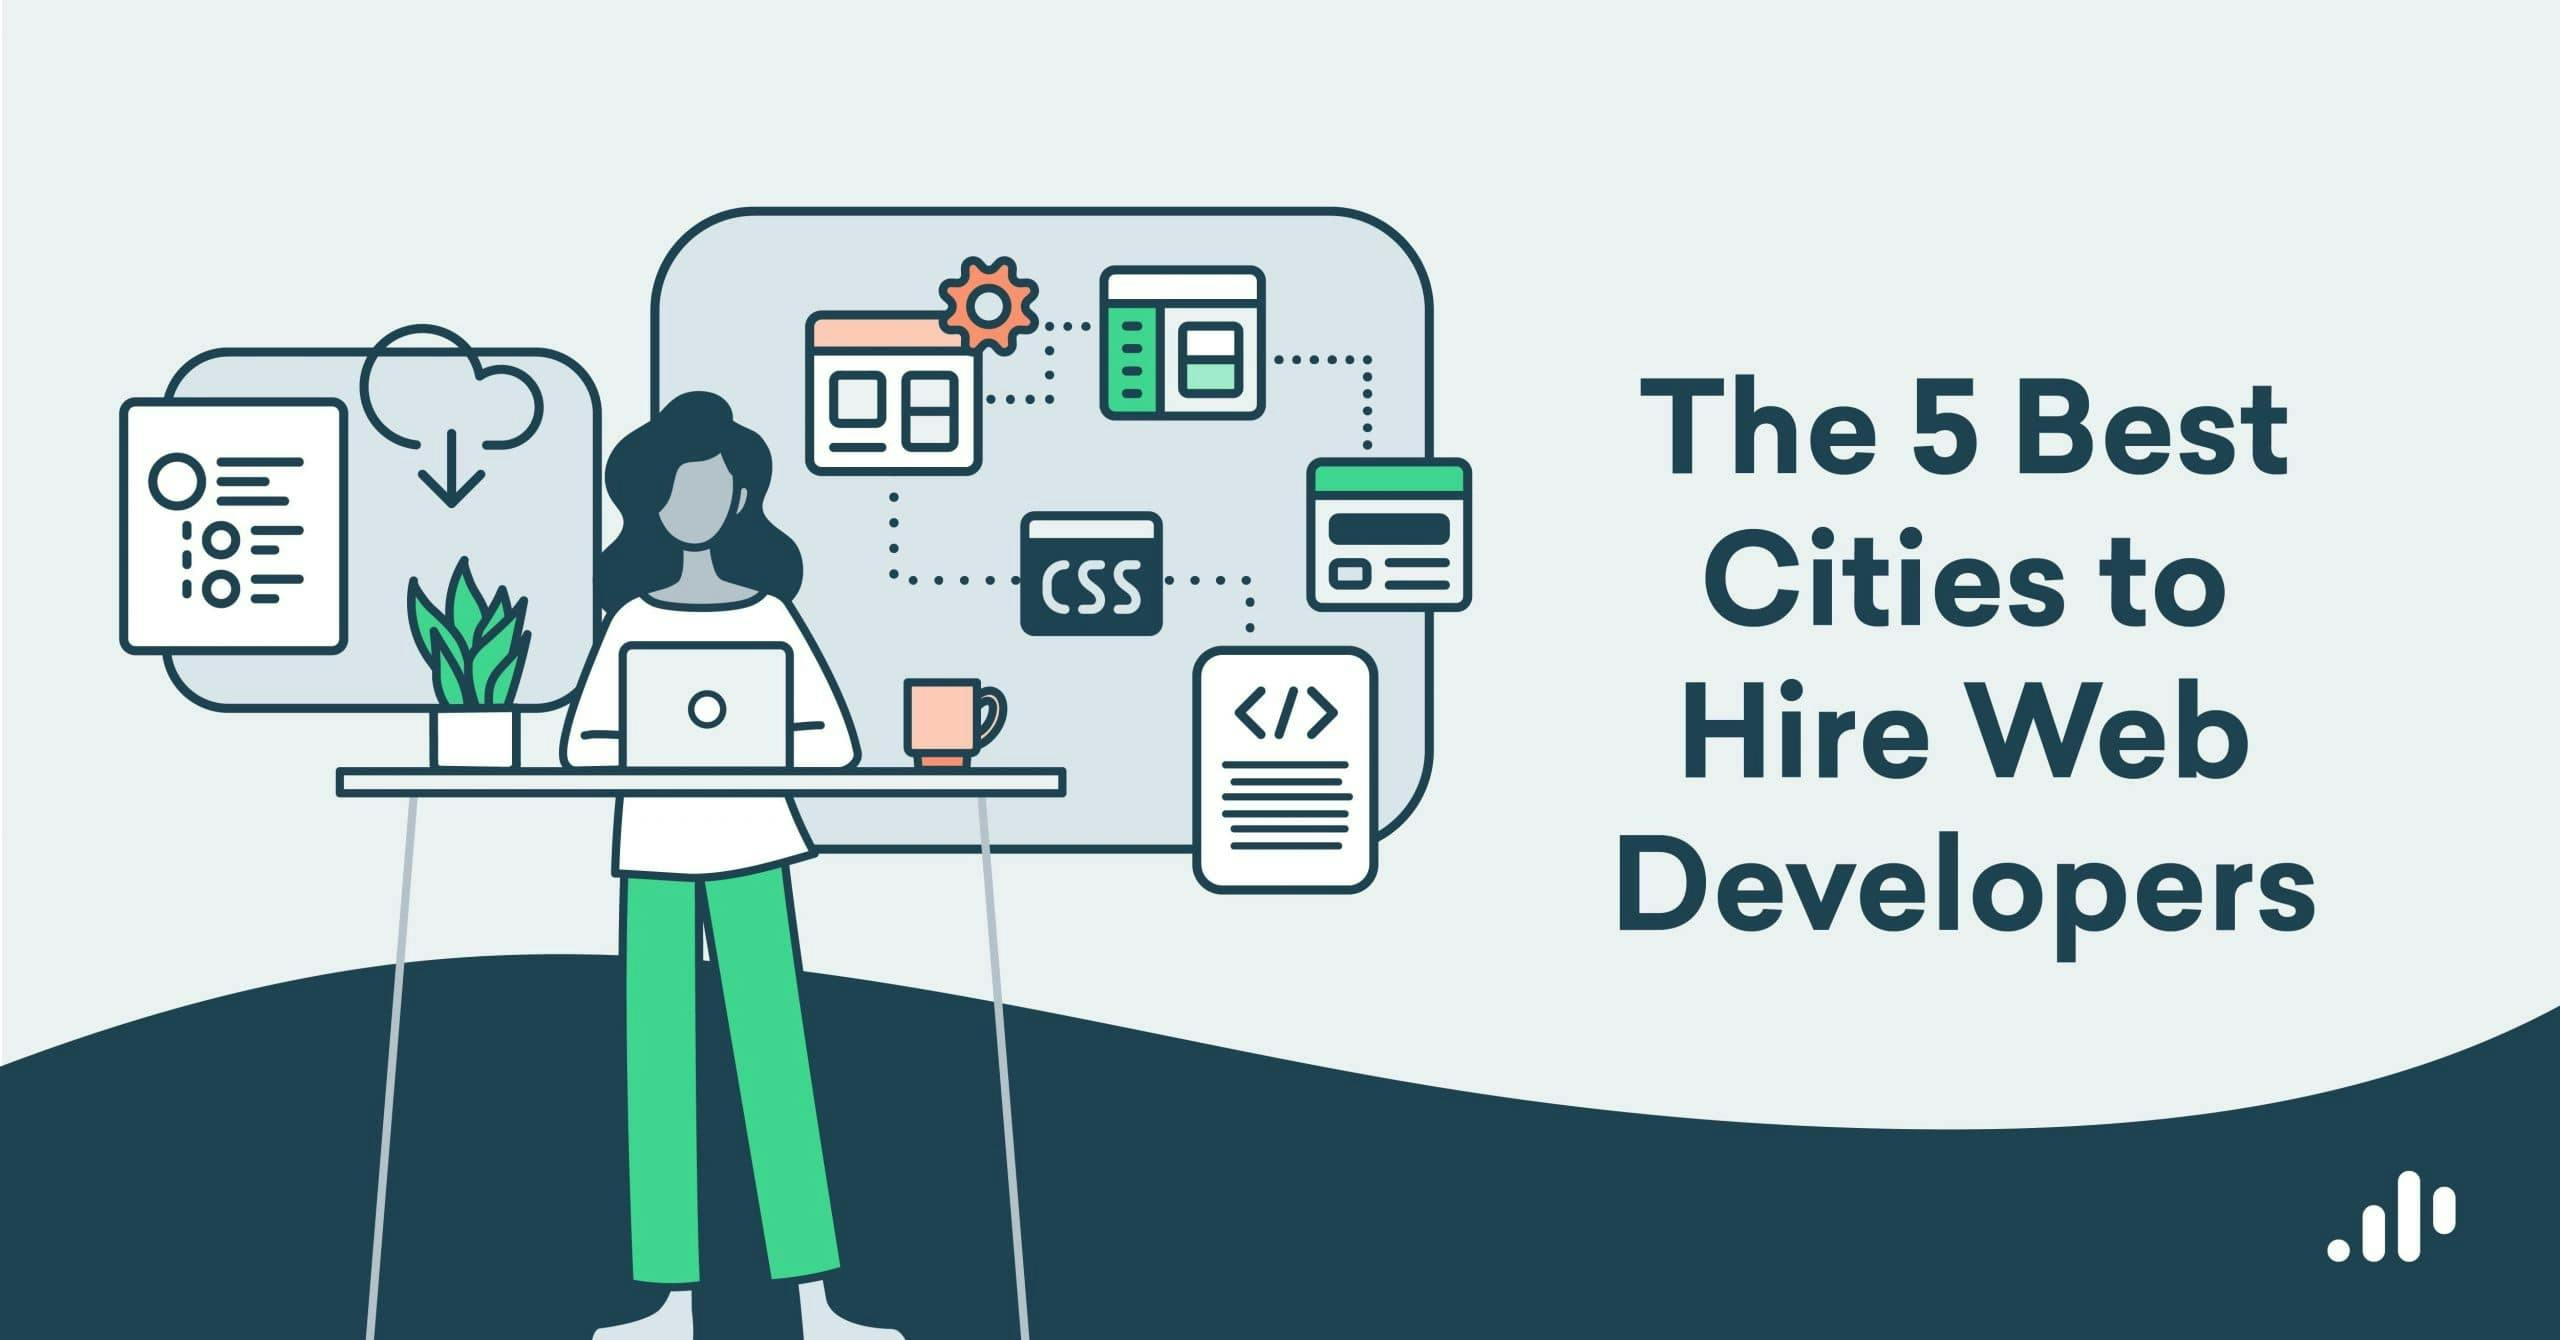 The 5 Best Cities to Hire Web Developers